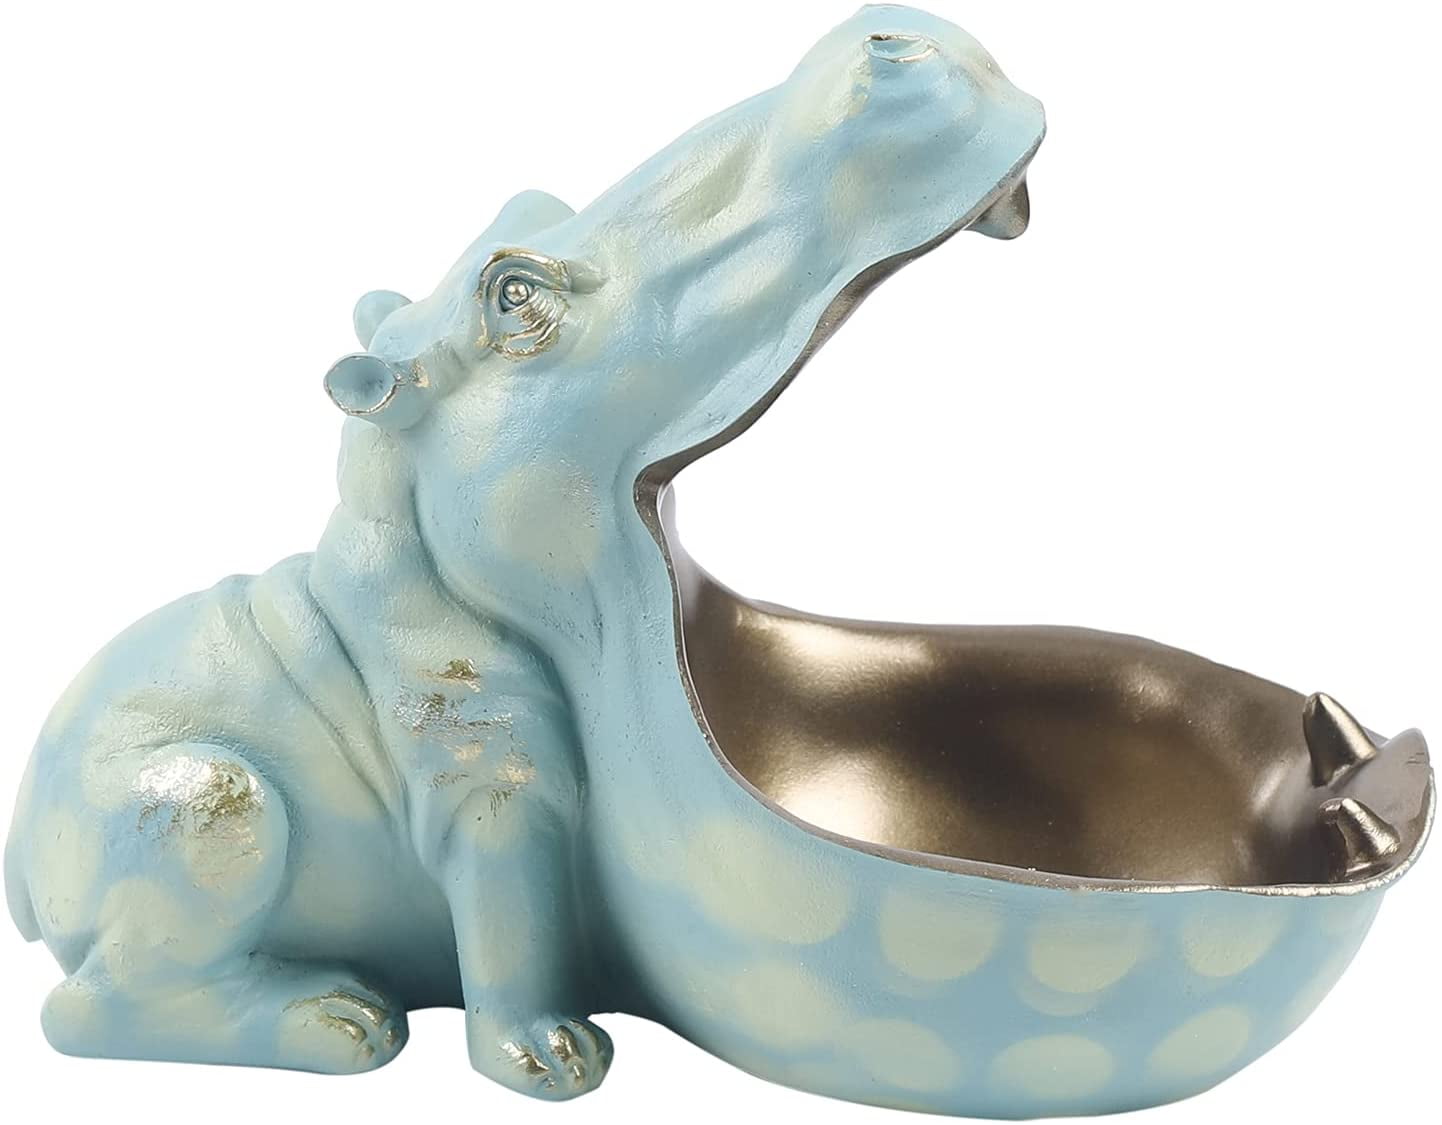 Resin Hippo Figurines Desktop Decoration Home Accessories Statues For Good luck 